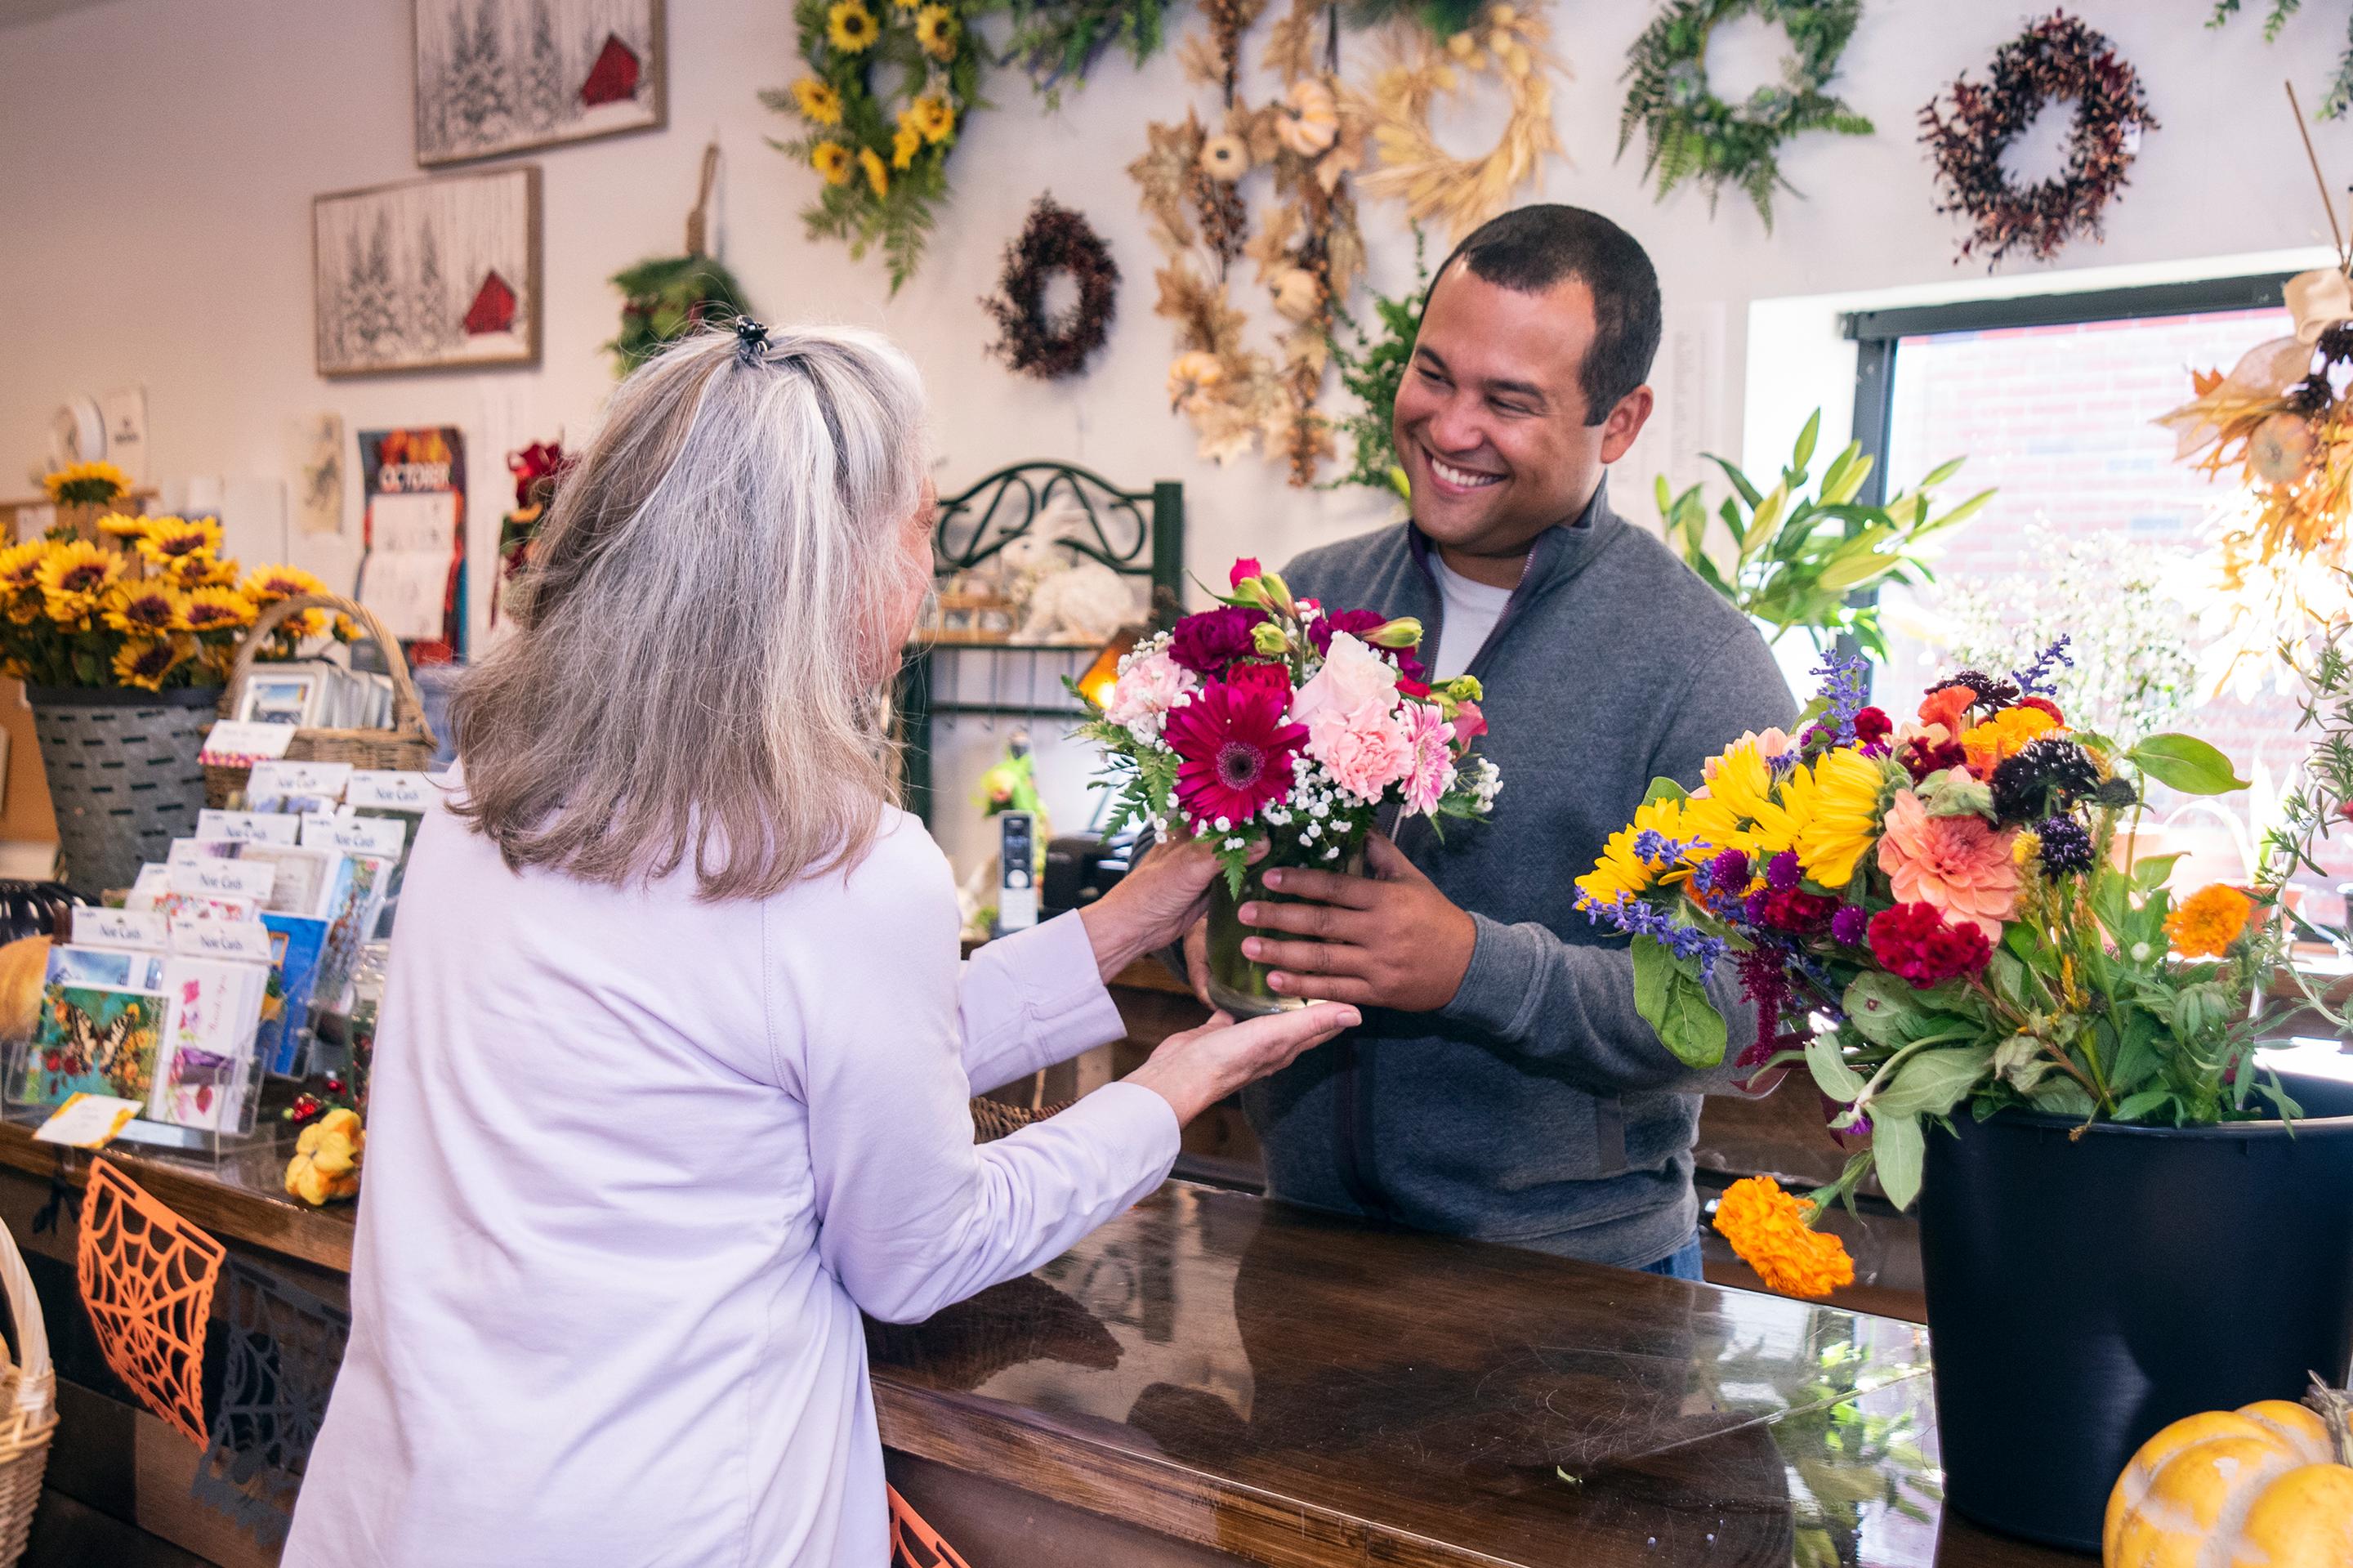 Image of Ken handing a bouquet to a woman purchasing flowers at flower shop counter